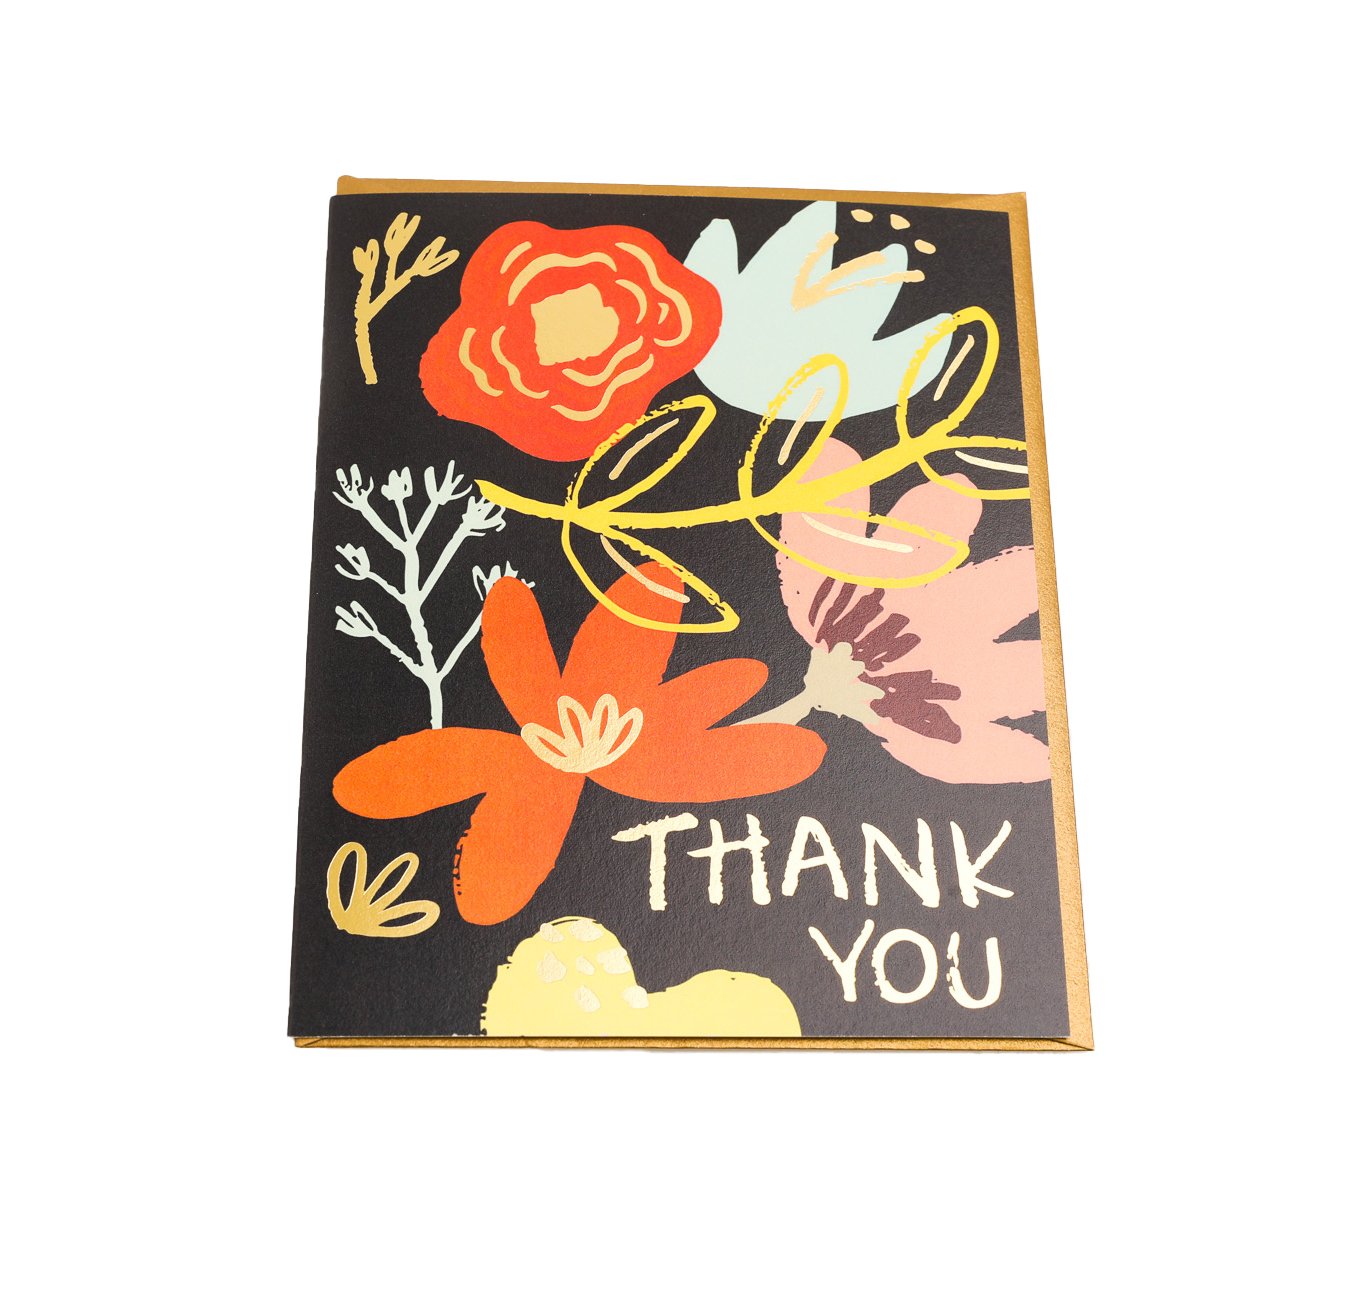 9th Letter Press "thank you" card